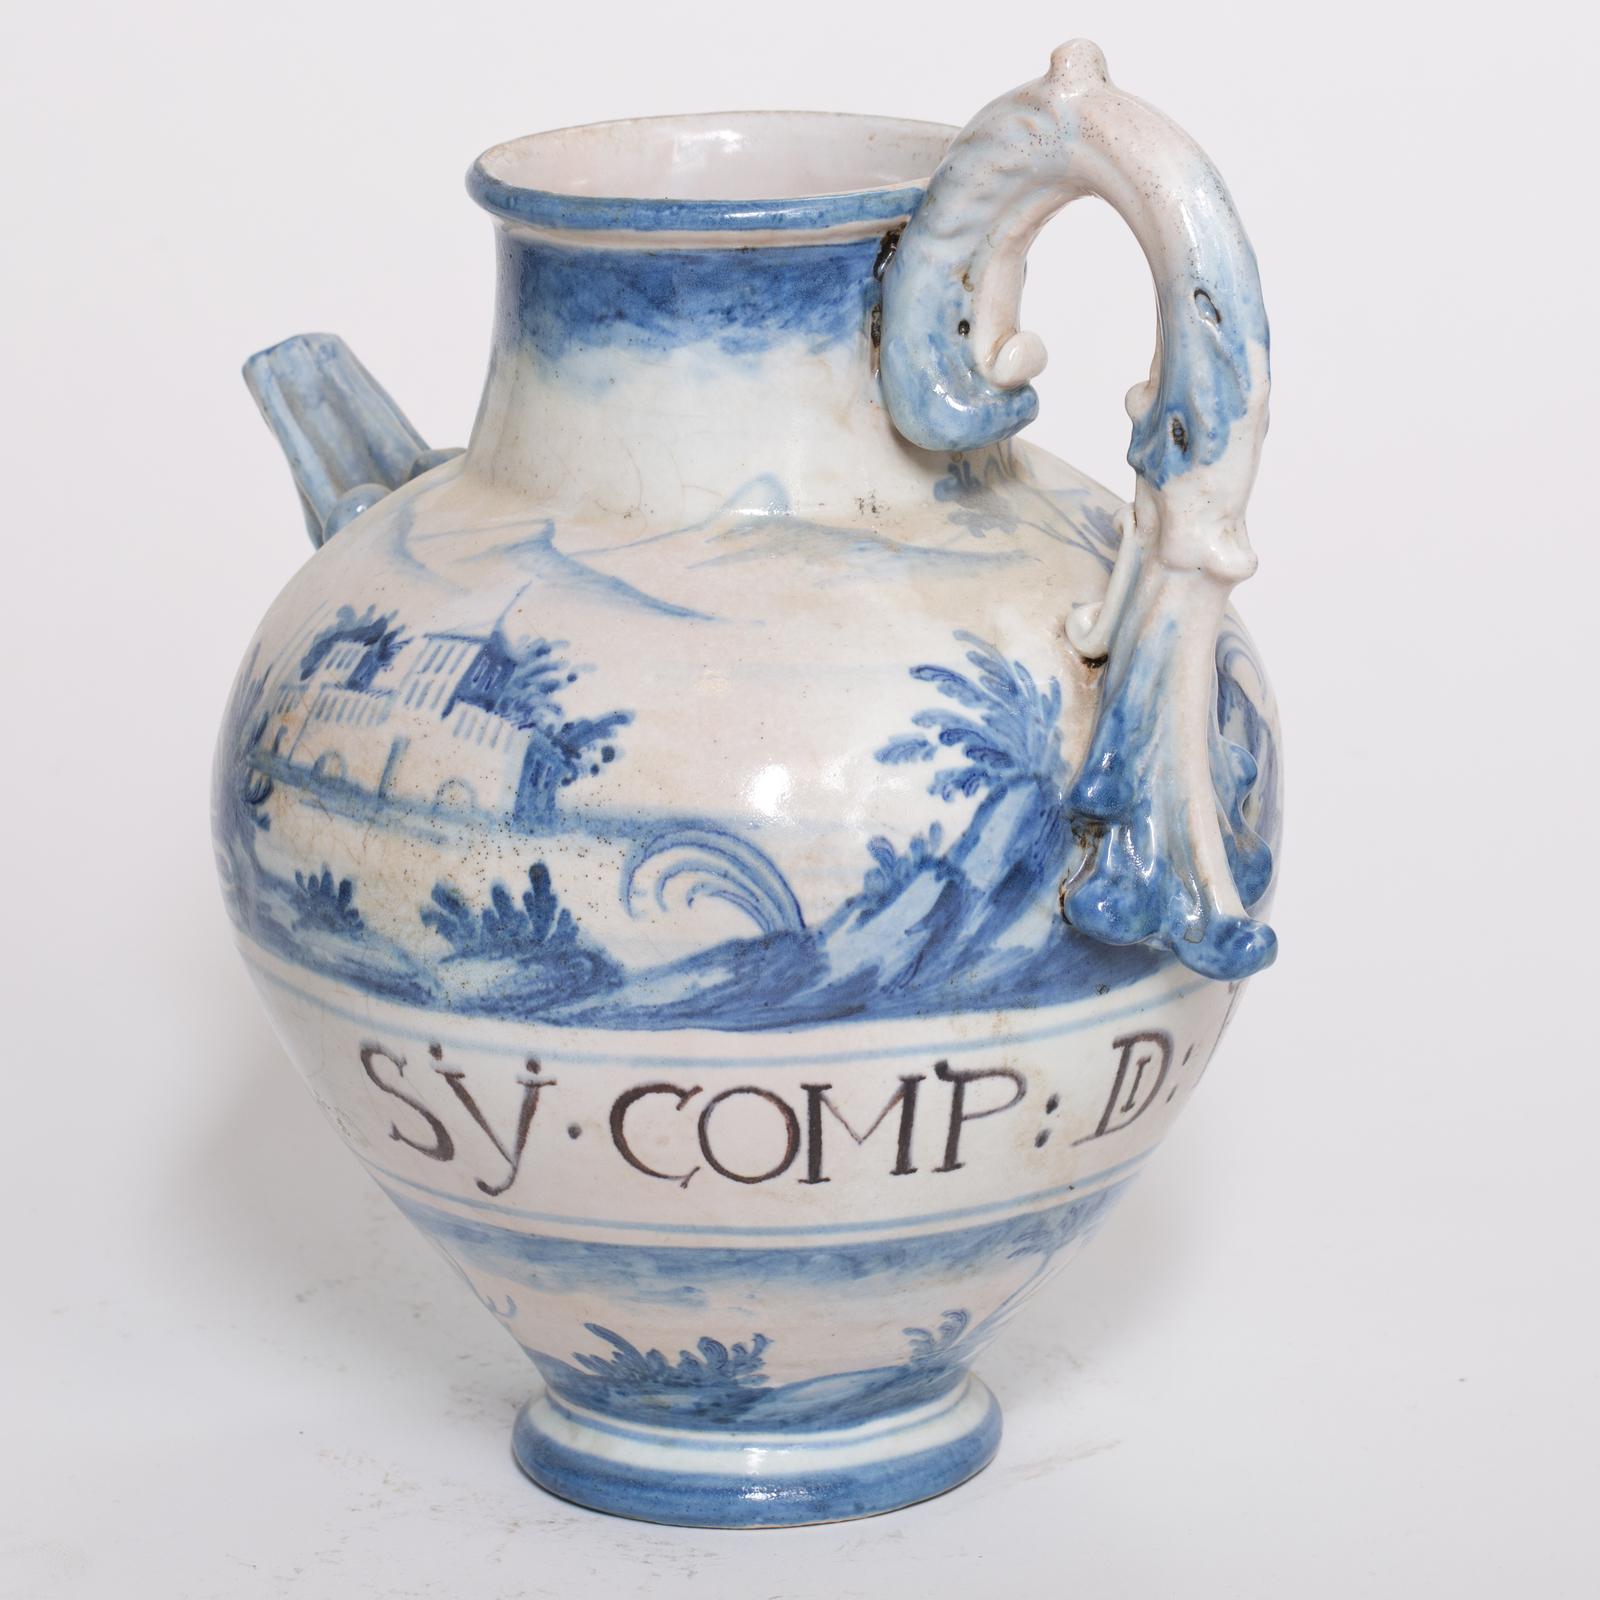 Masterful reproduction of an antique apothecary water jar with a spout and handle, entirely handcrafted by the maiolica artisans of Manetti e Masini in Florence. The jar is executed in the signature Ligurian maiolica style, namely motifs in white